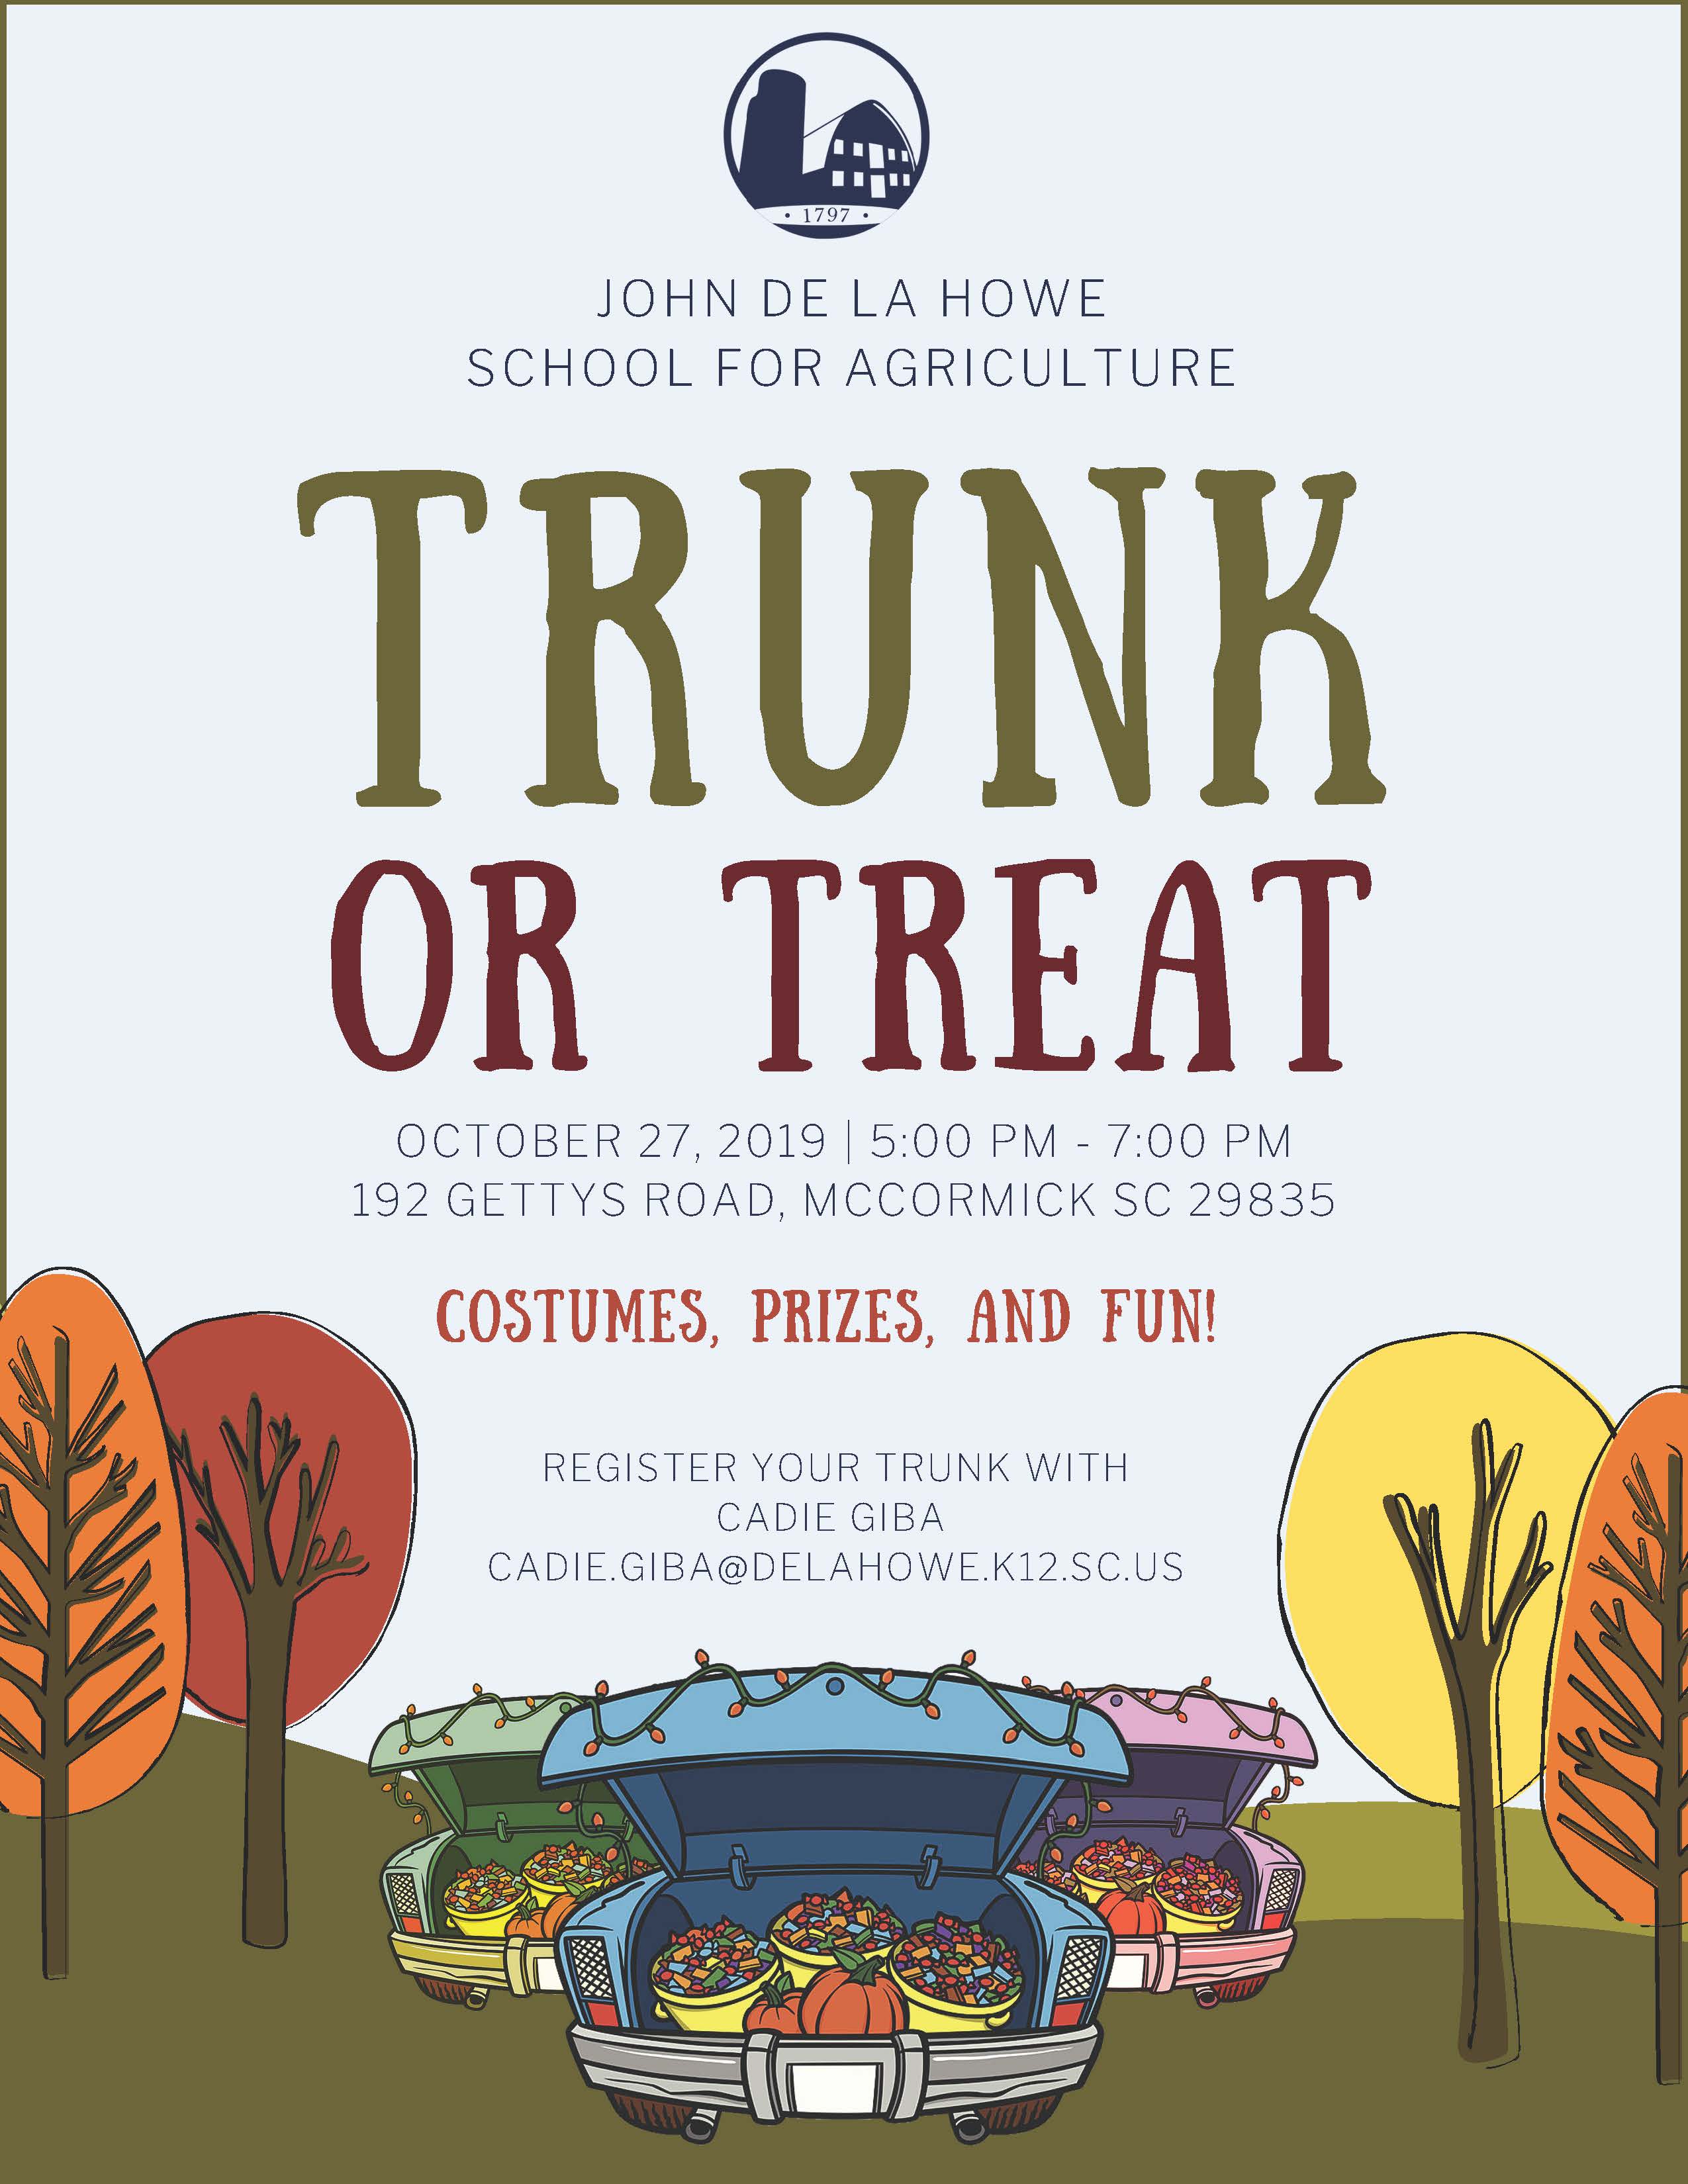 JDLH Trunk or Treat 2019